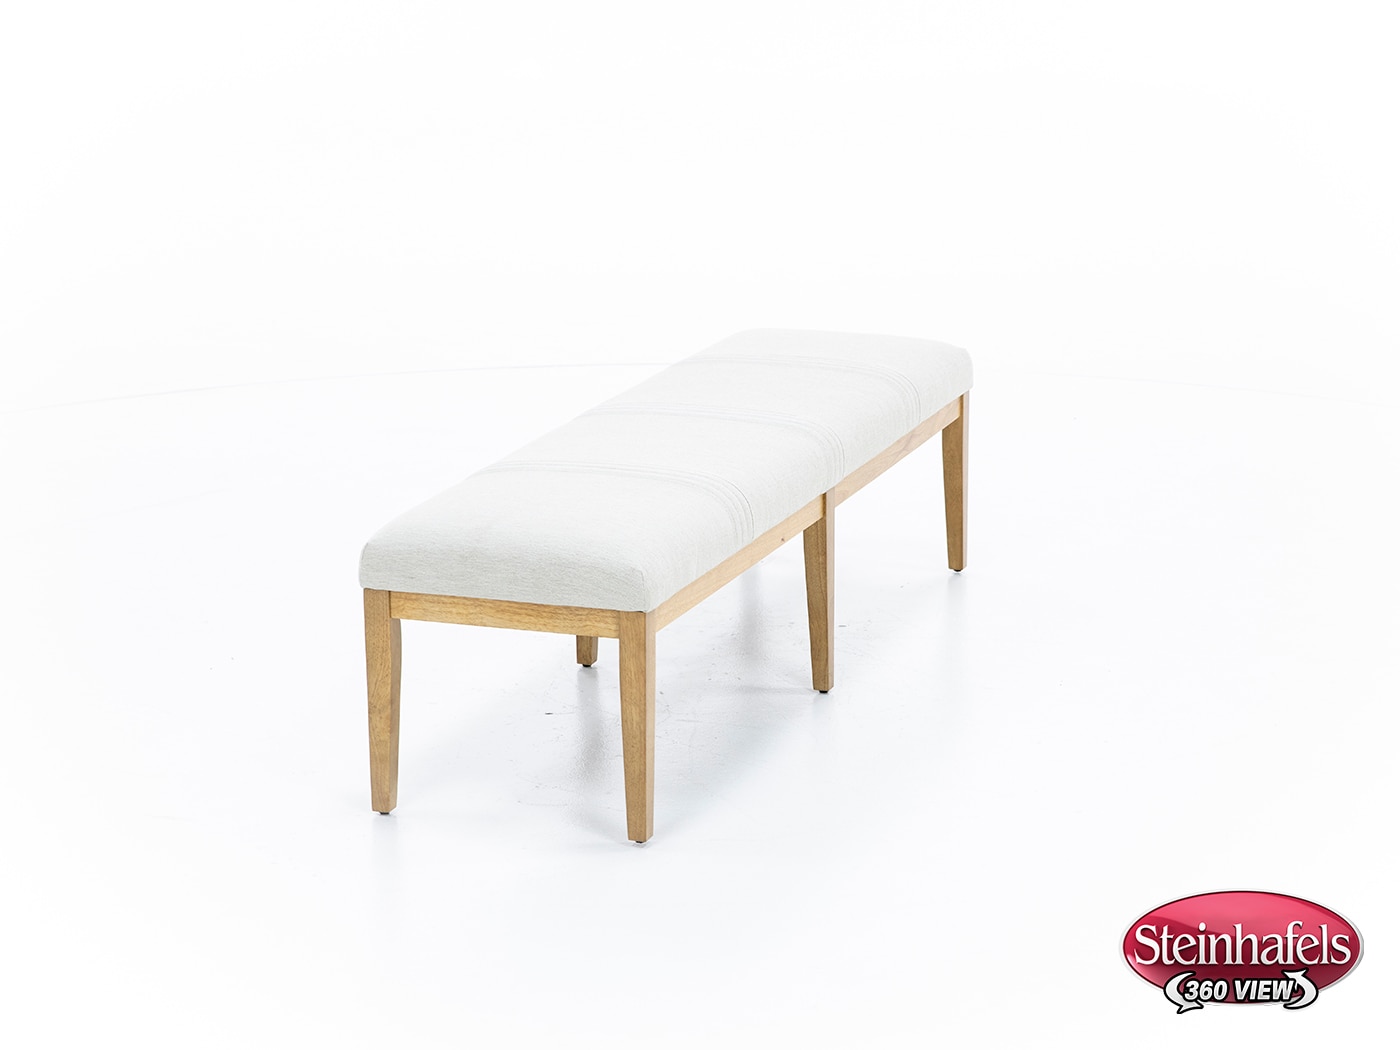 rivr wood grain inch standard seat height bench  image   